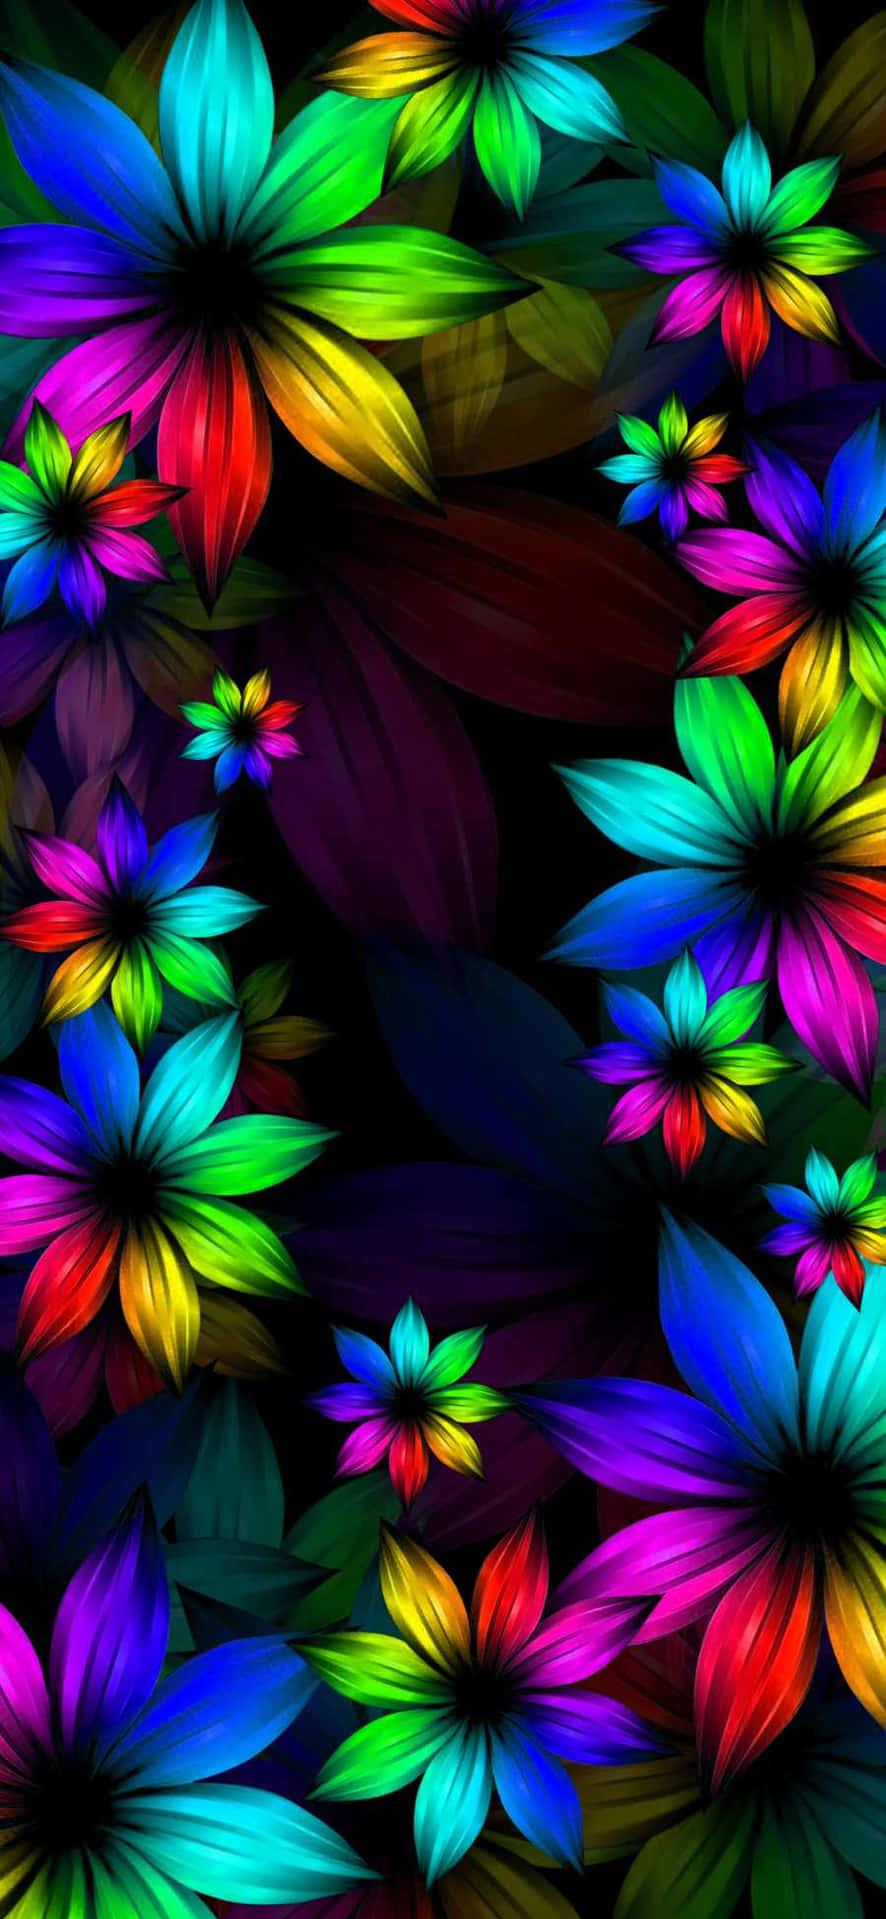 A Colorful Flower Wallpaper On Black Background